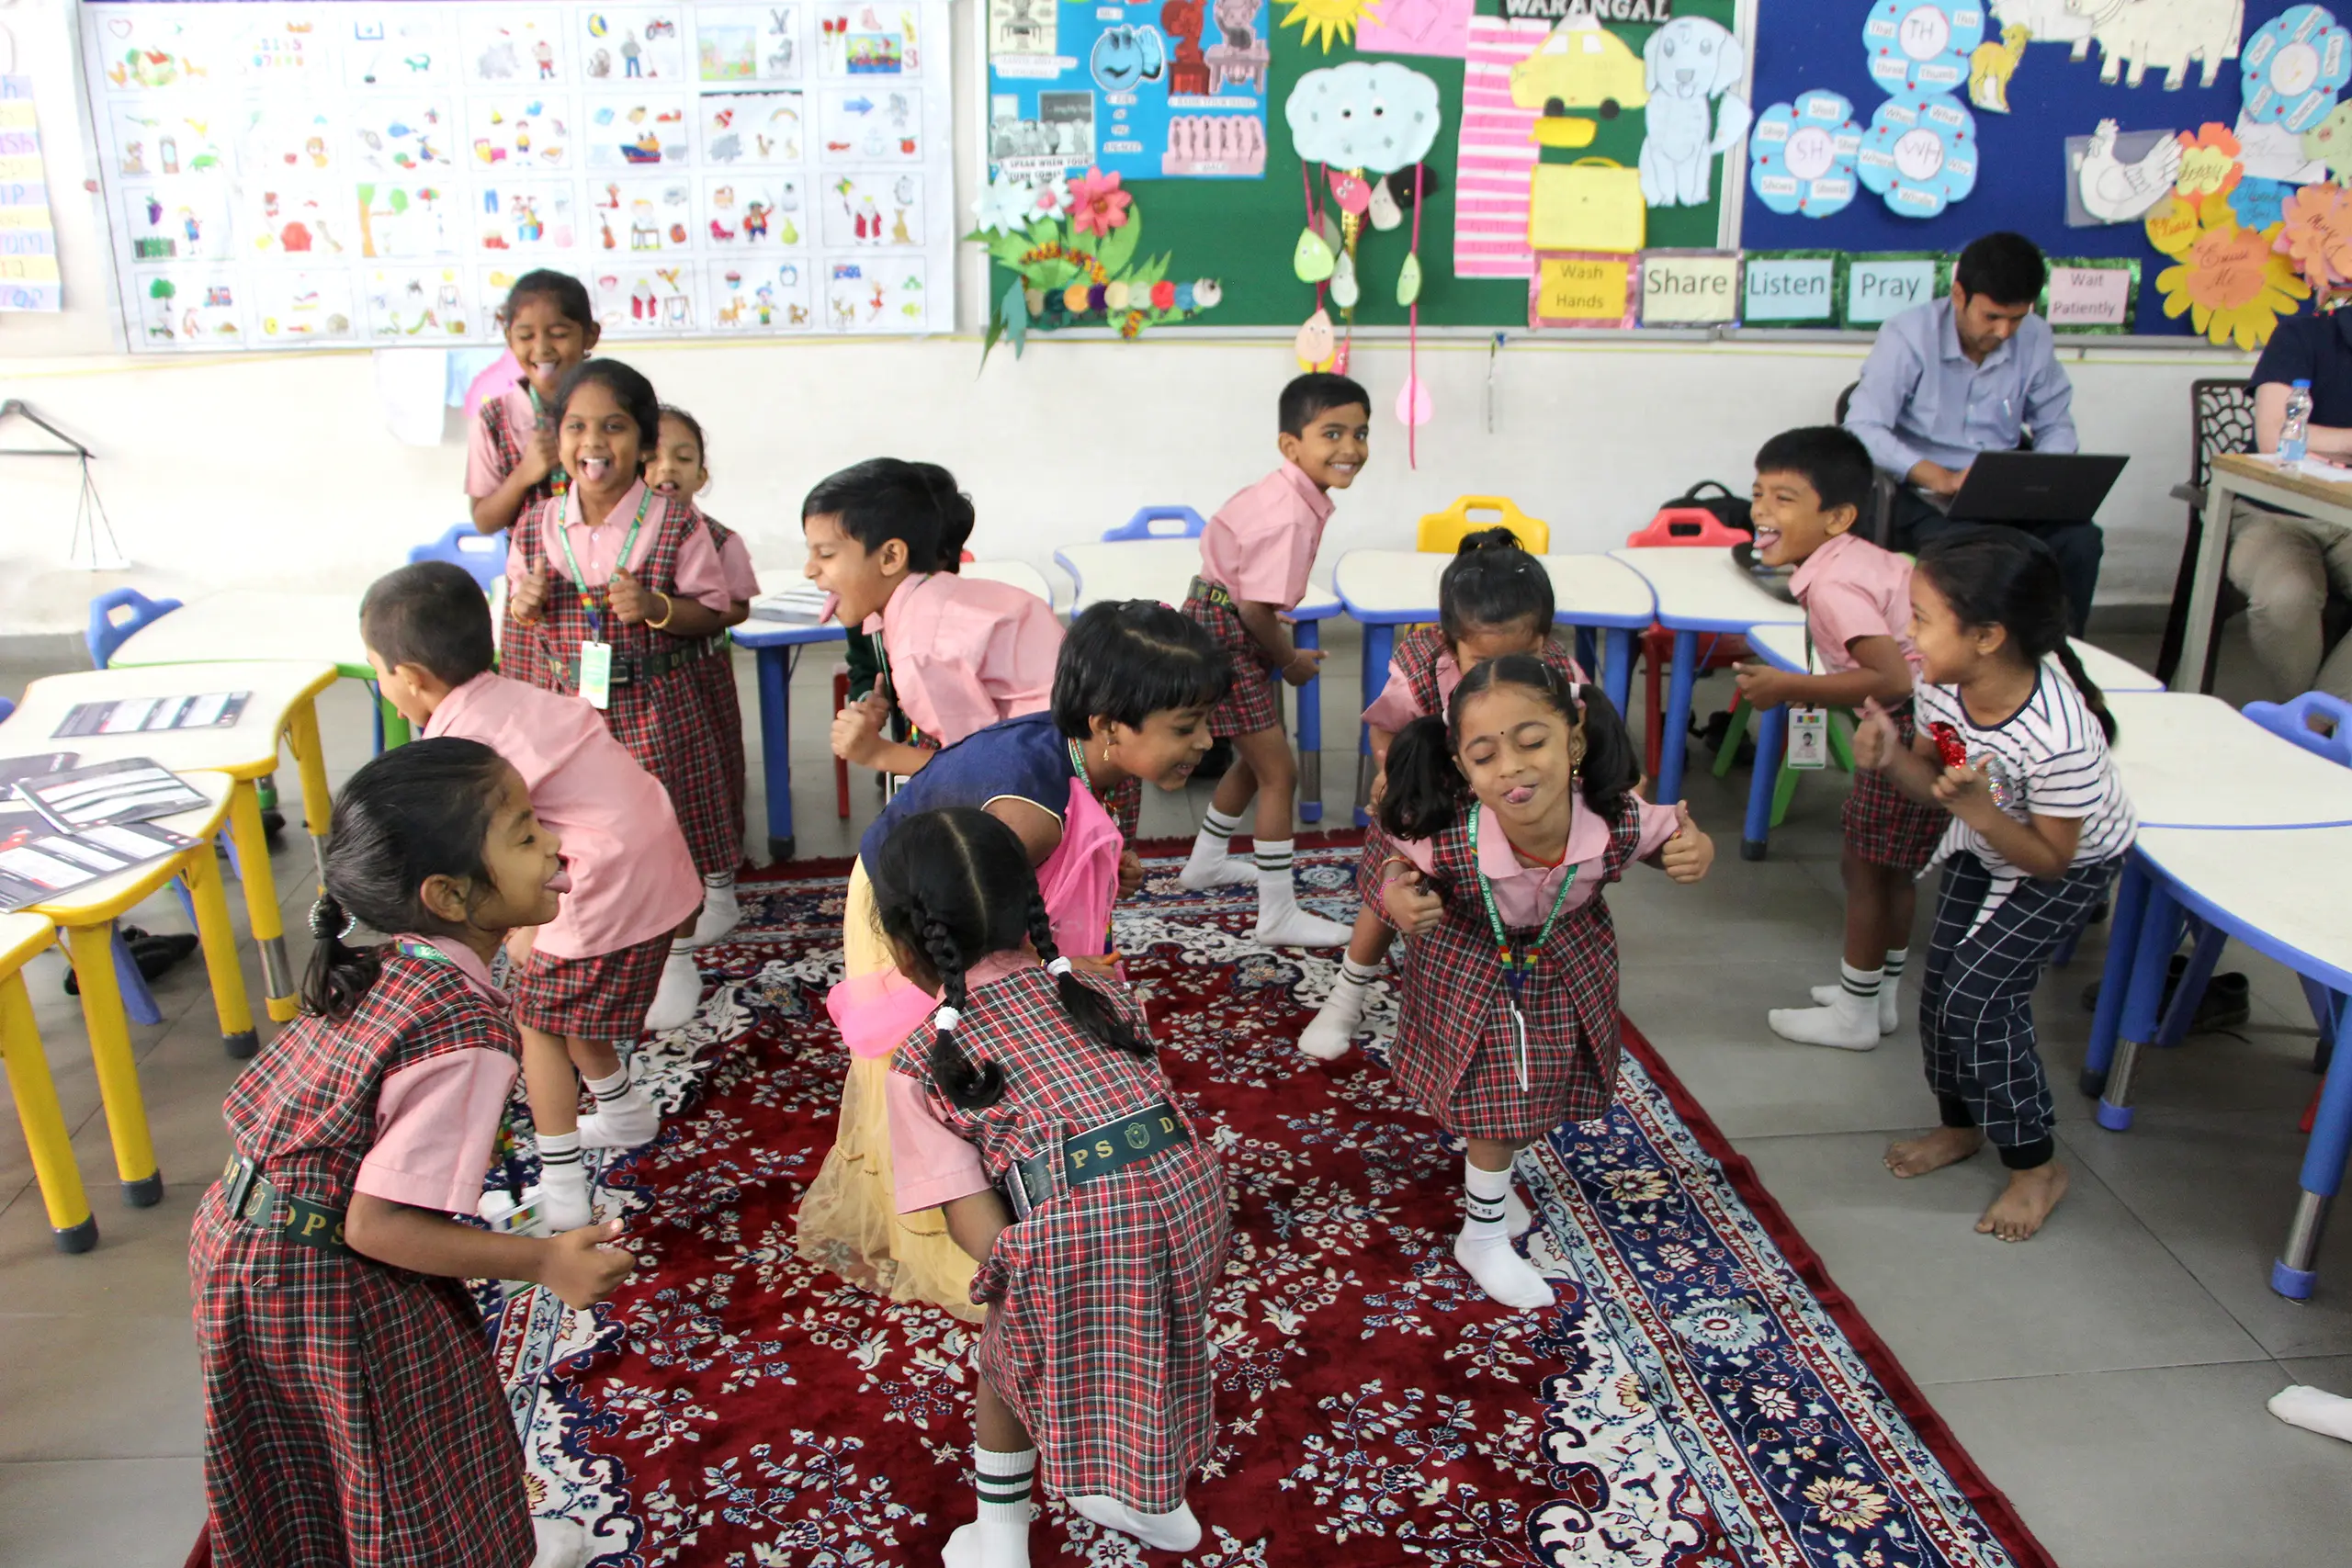 Childrens playing and having fun in the classroom.